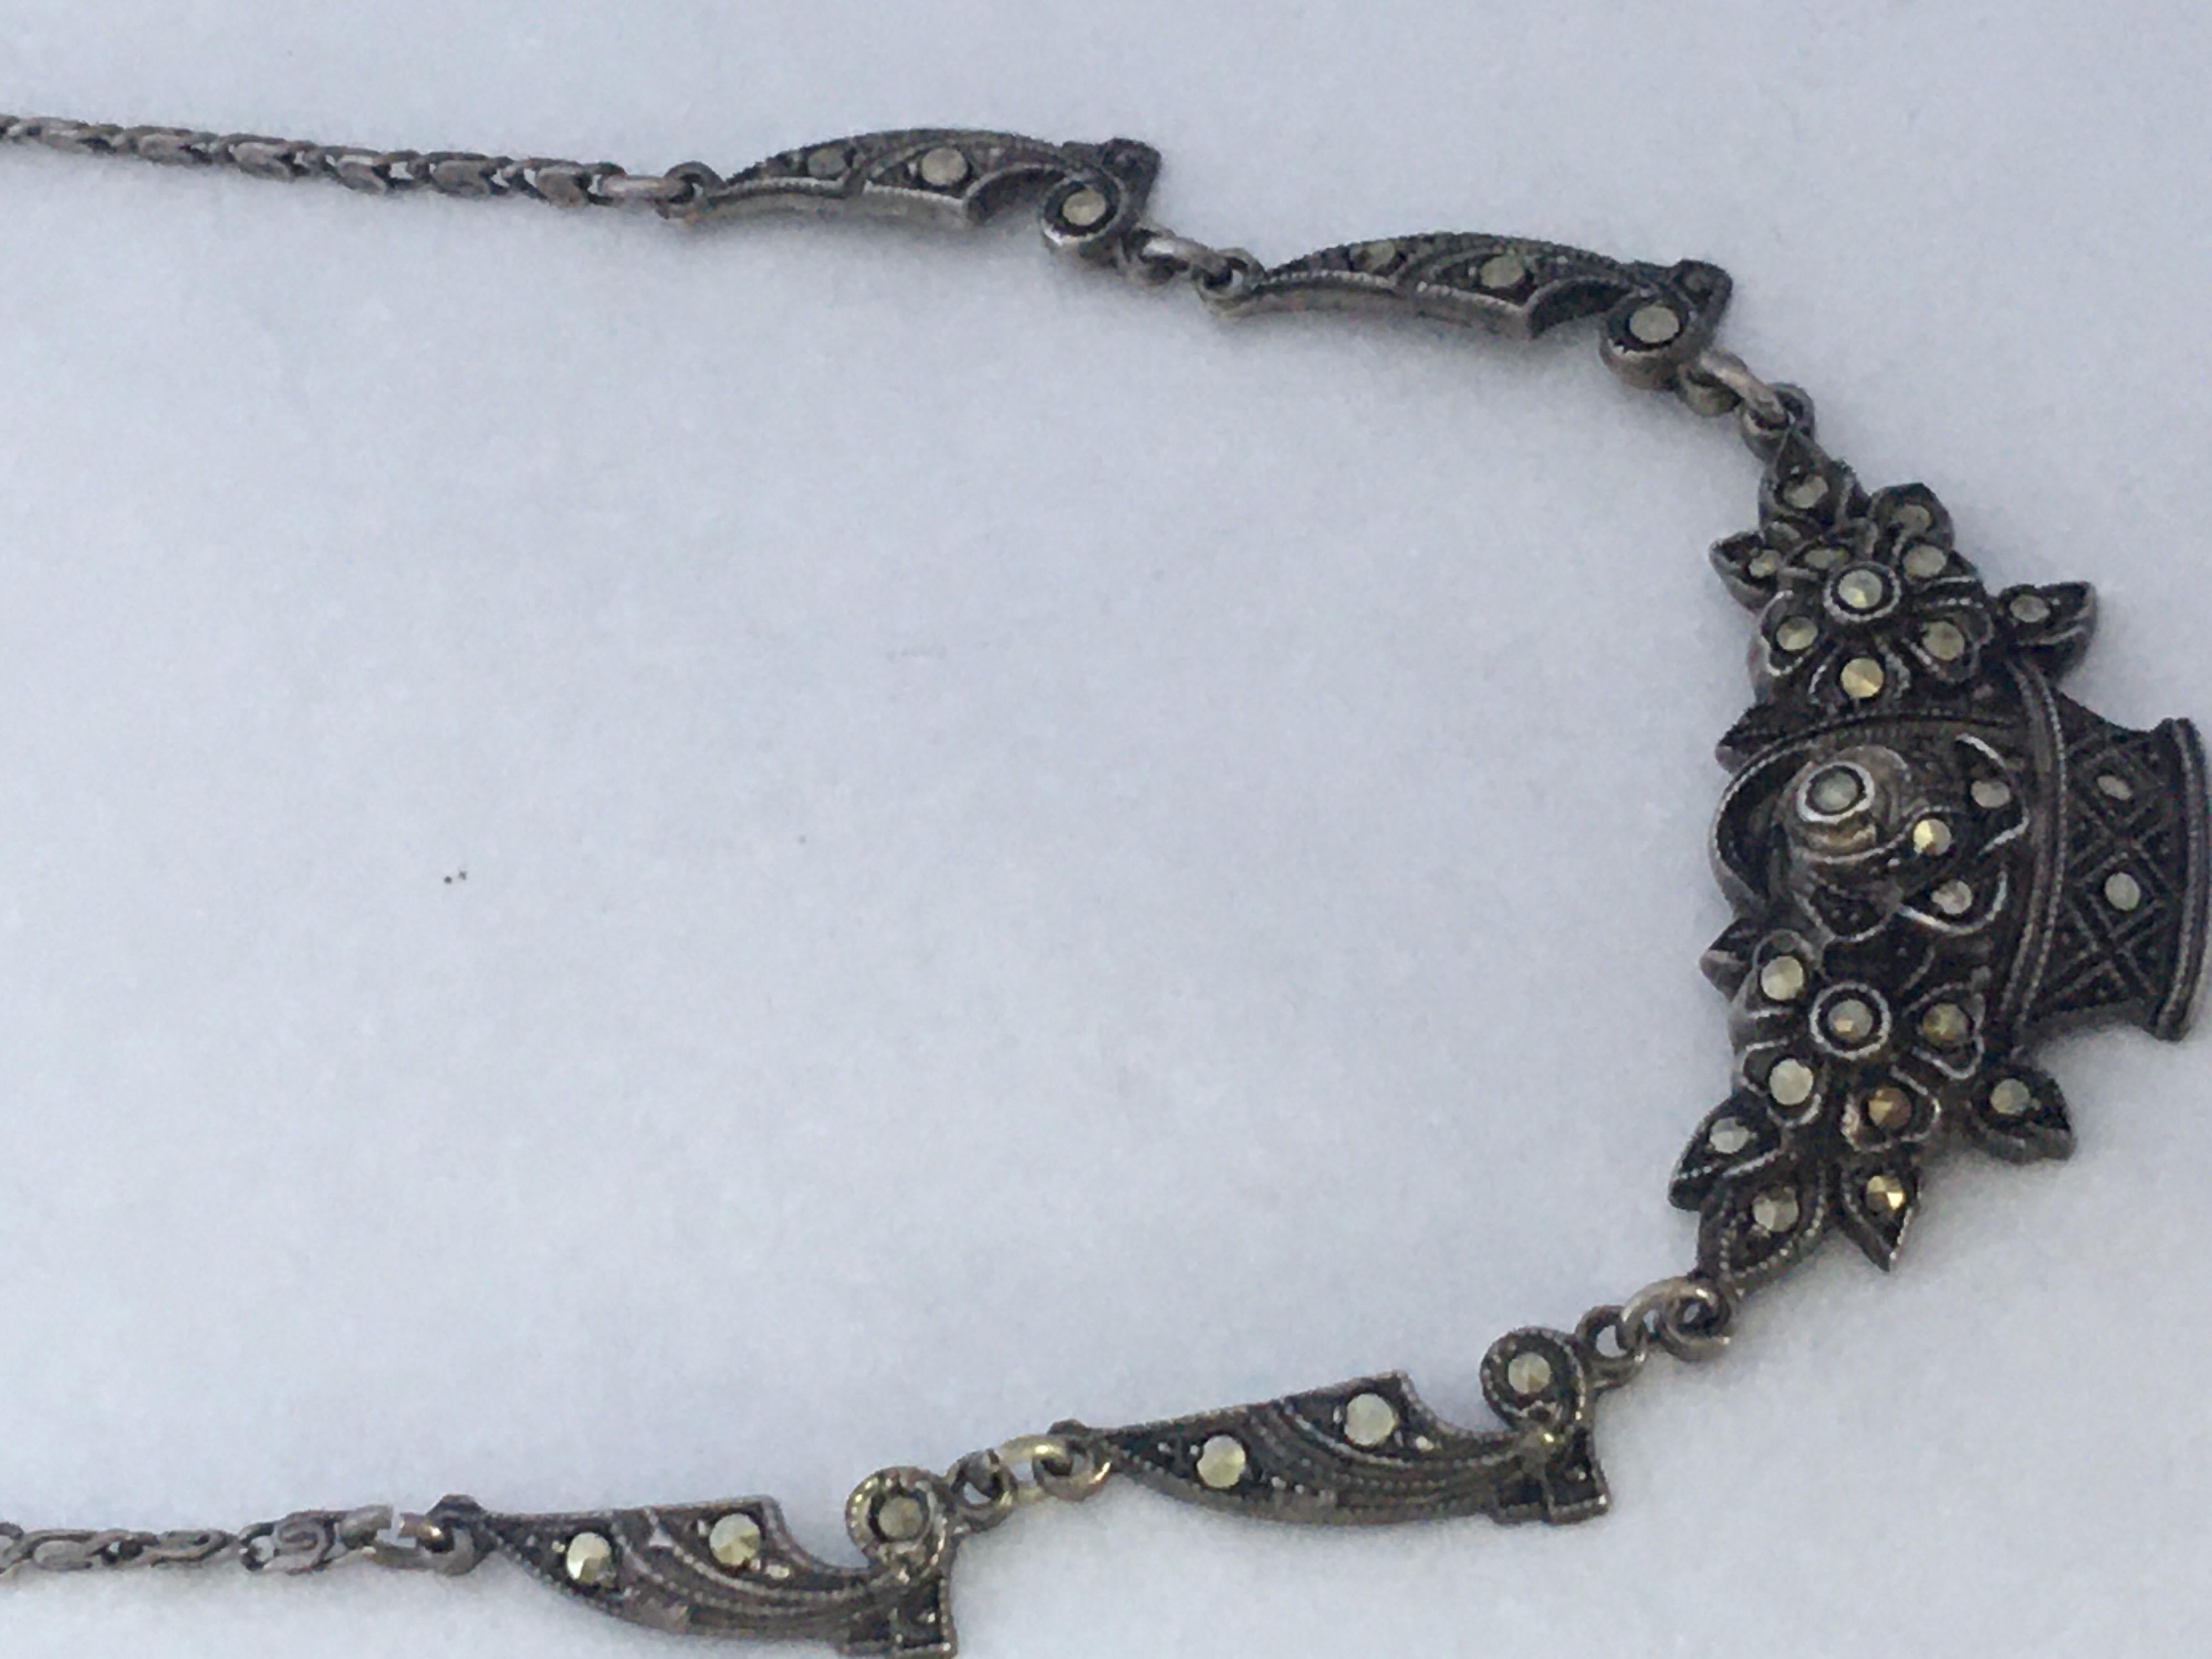 This beautiful vintage pendant necklace is in good pre-owned condition.  It is measured at 17 inches length